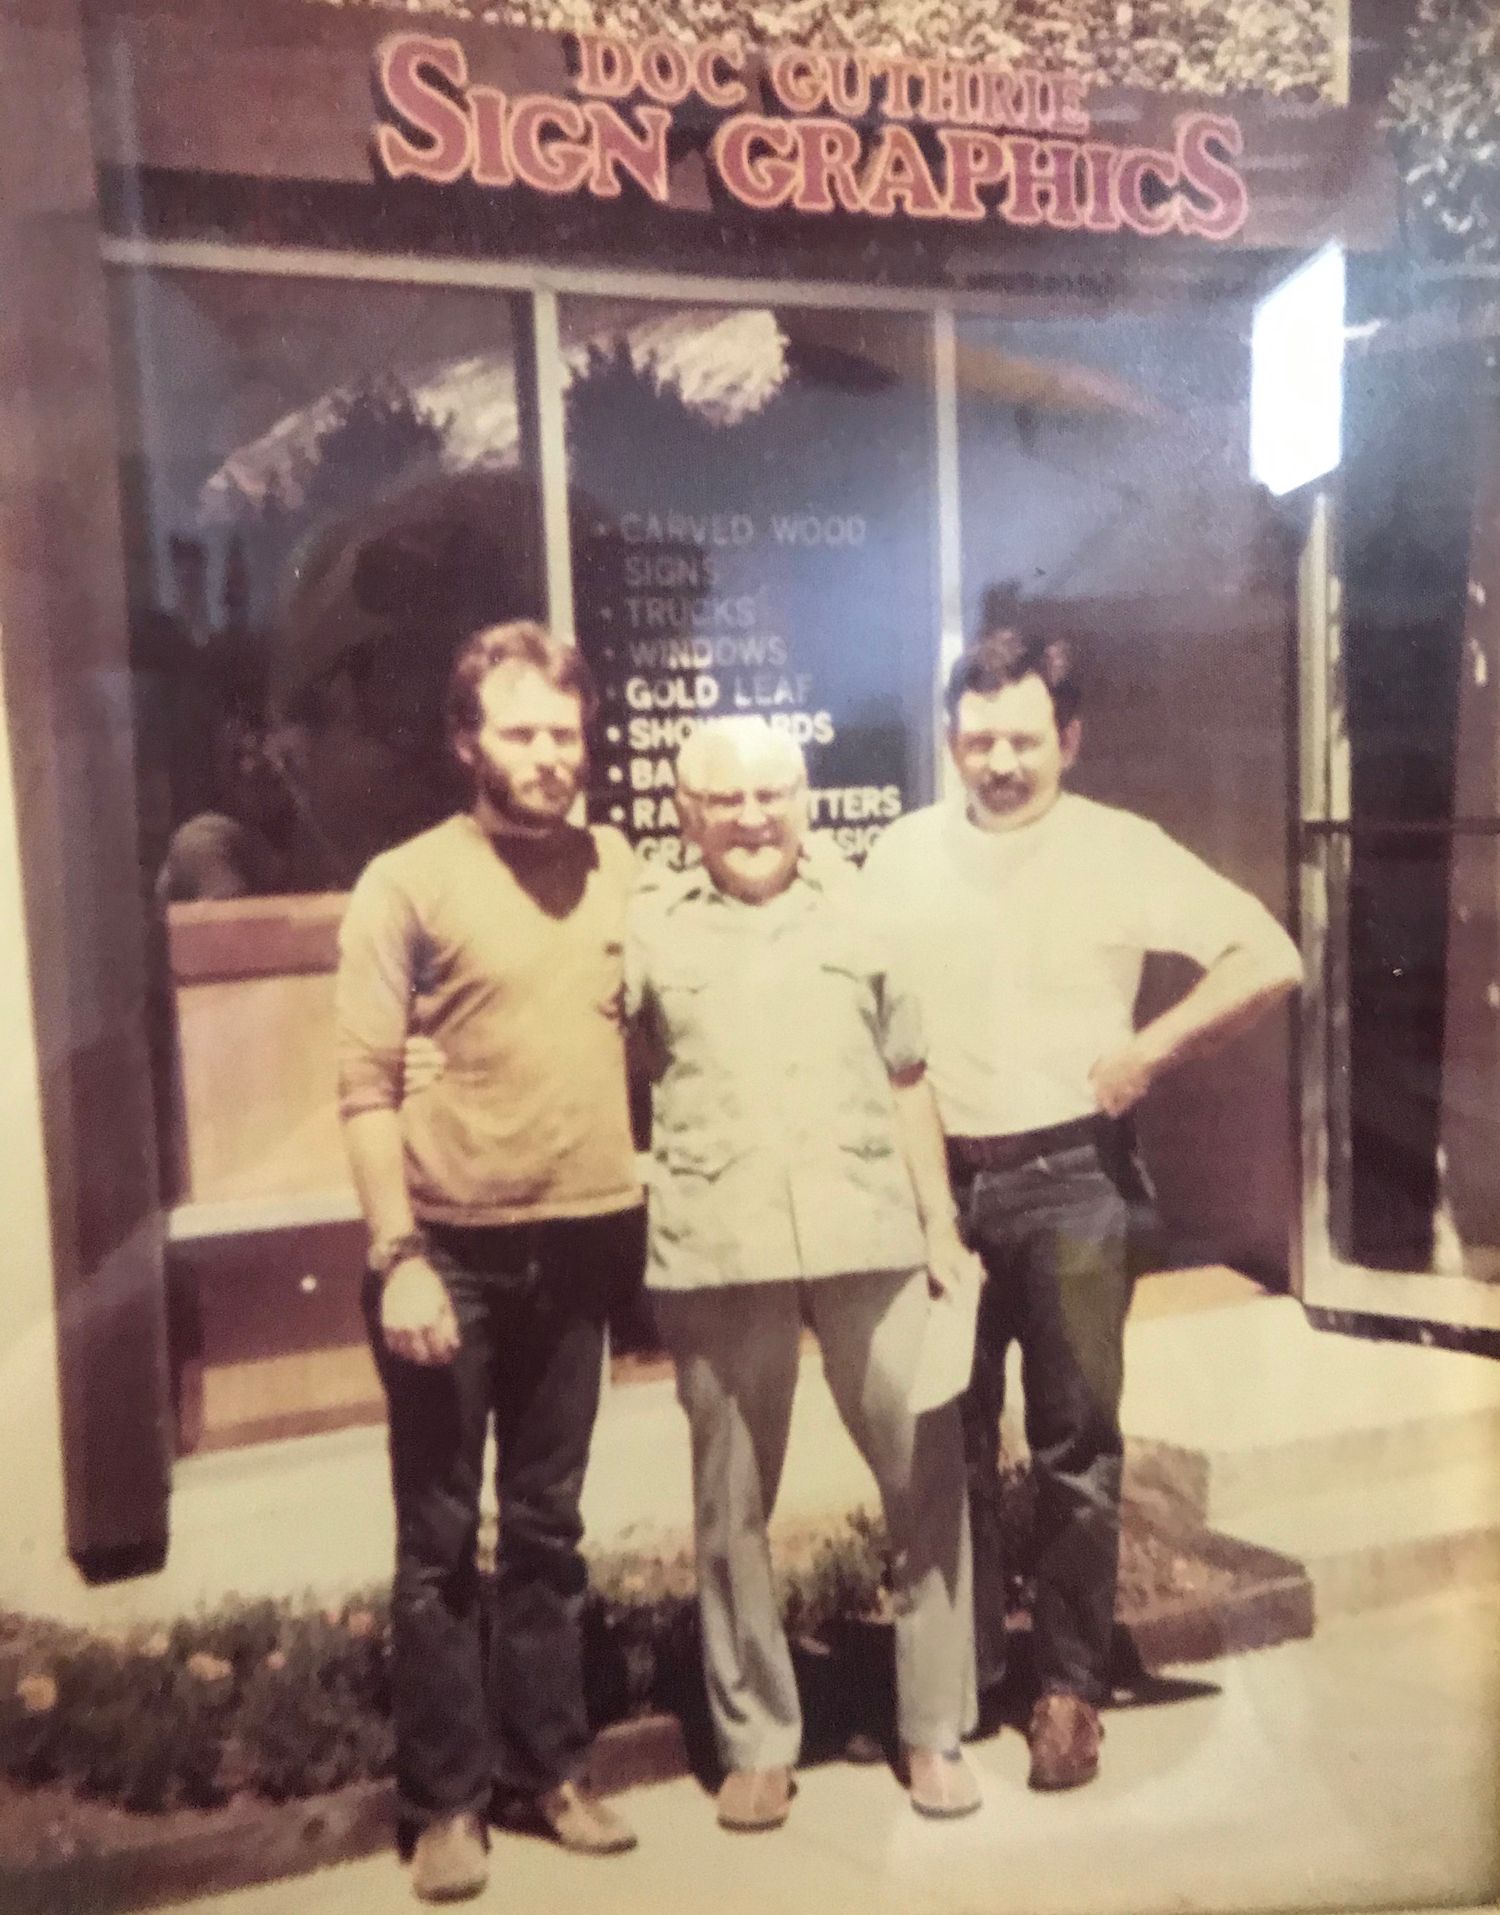 Three men standing in front of a sign shop.